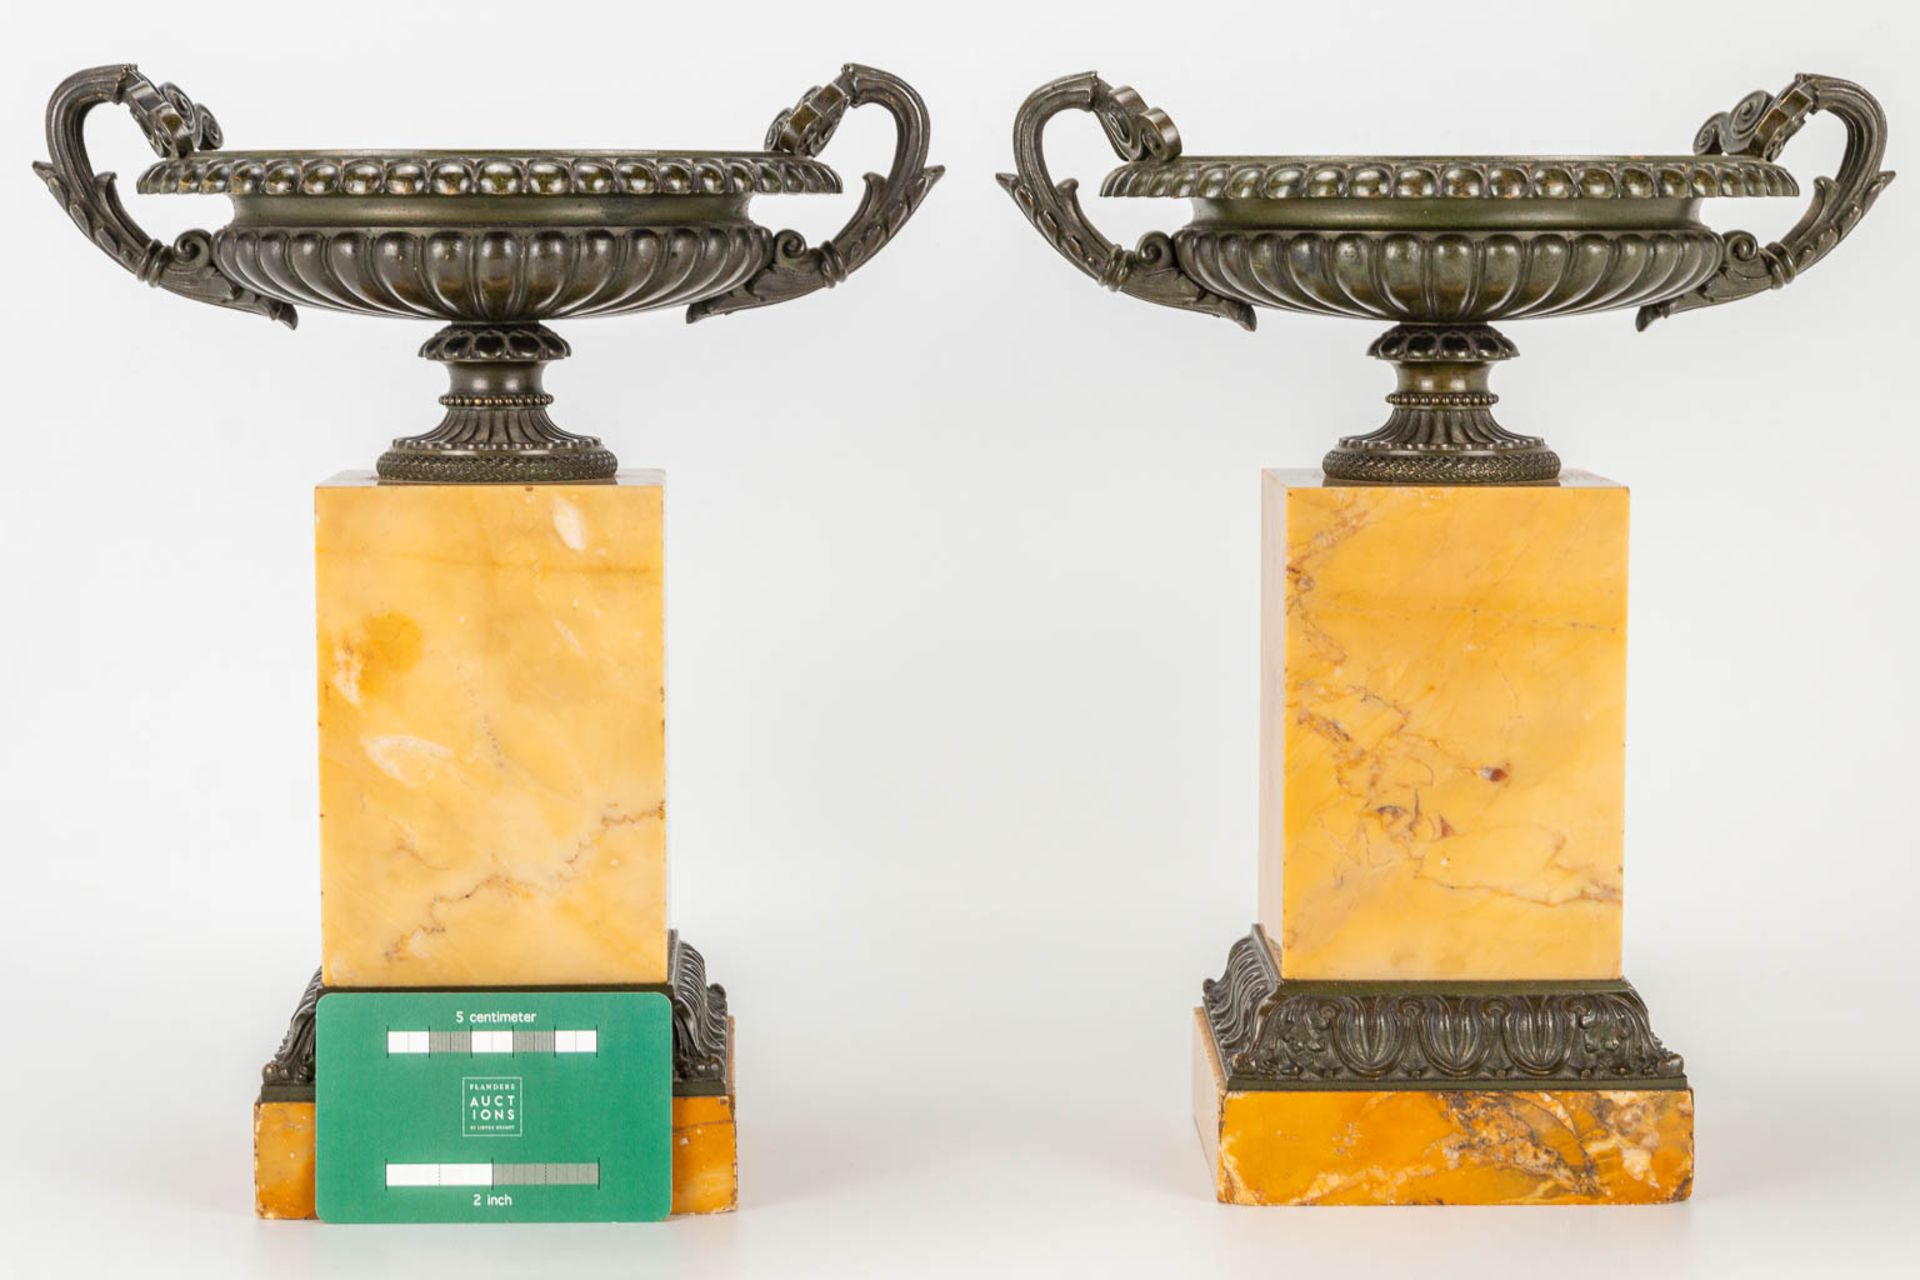 A pair of cassolettes in neoclassical style, made of bronze and mounted on a marble base. - Image 8 of 13